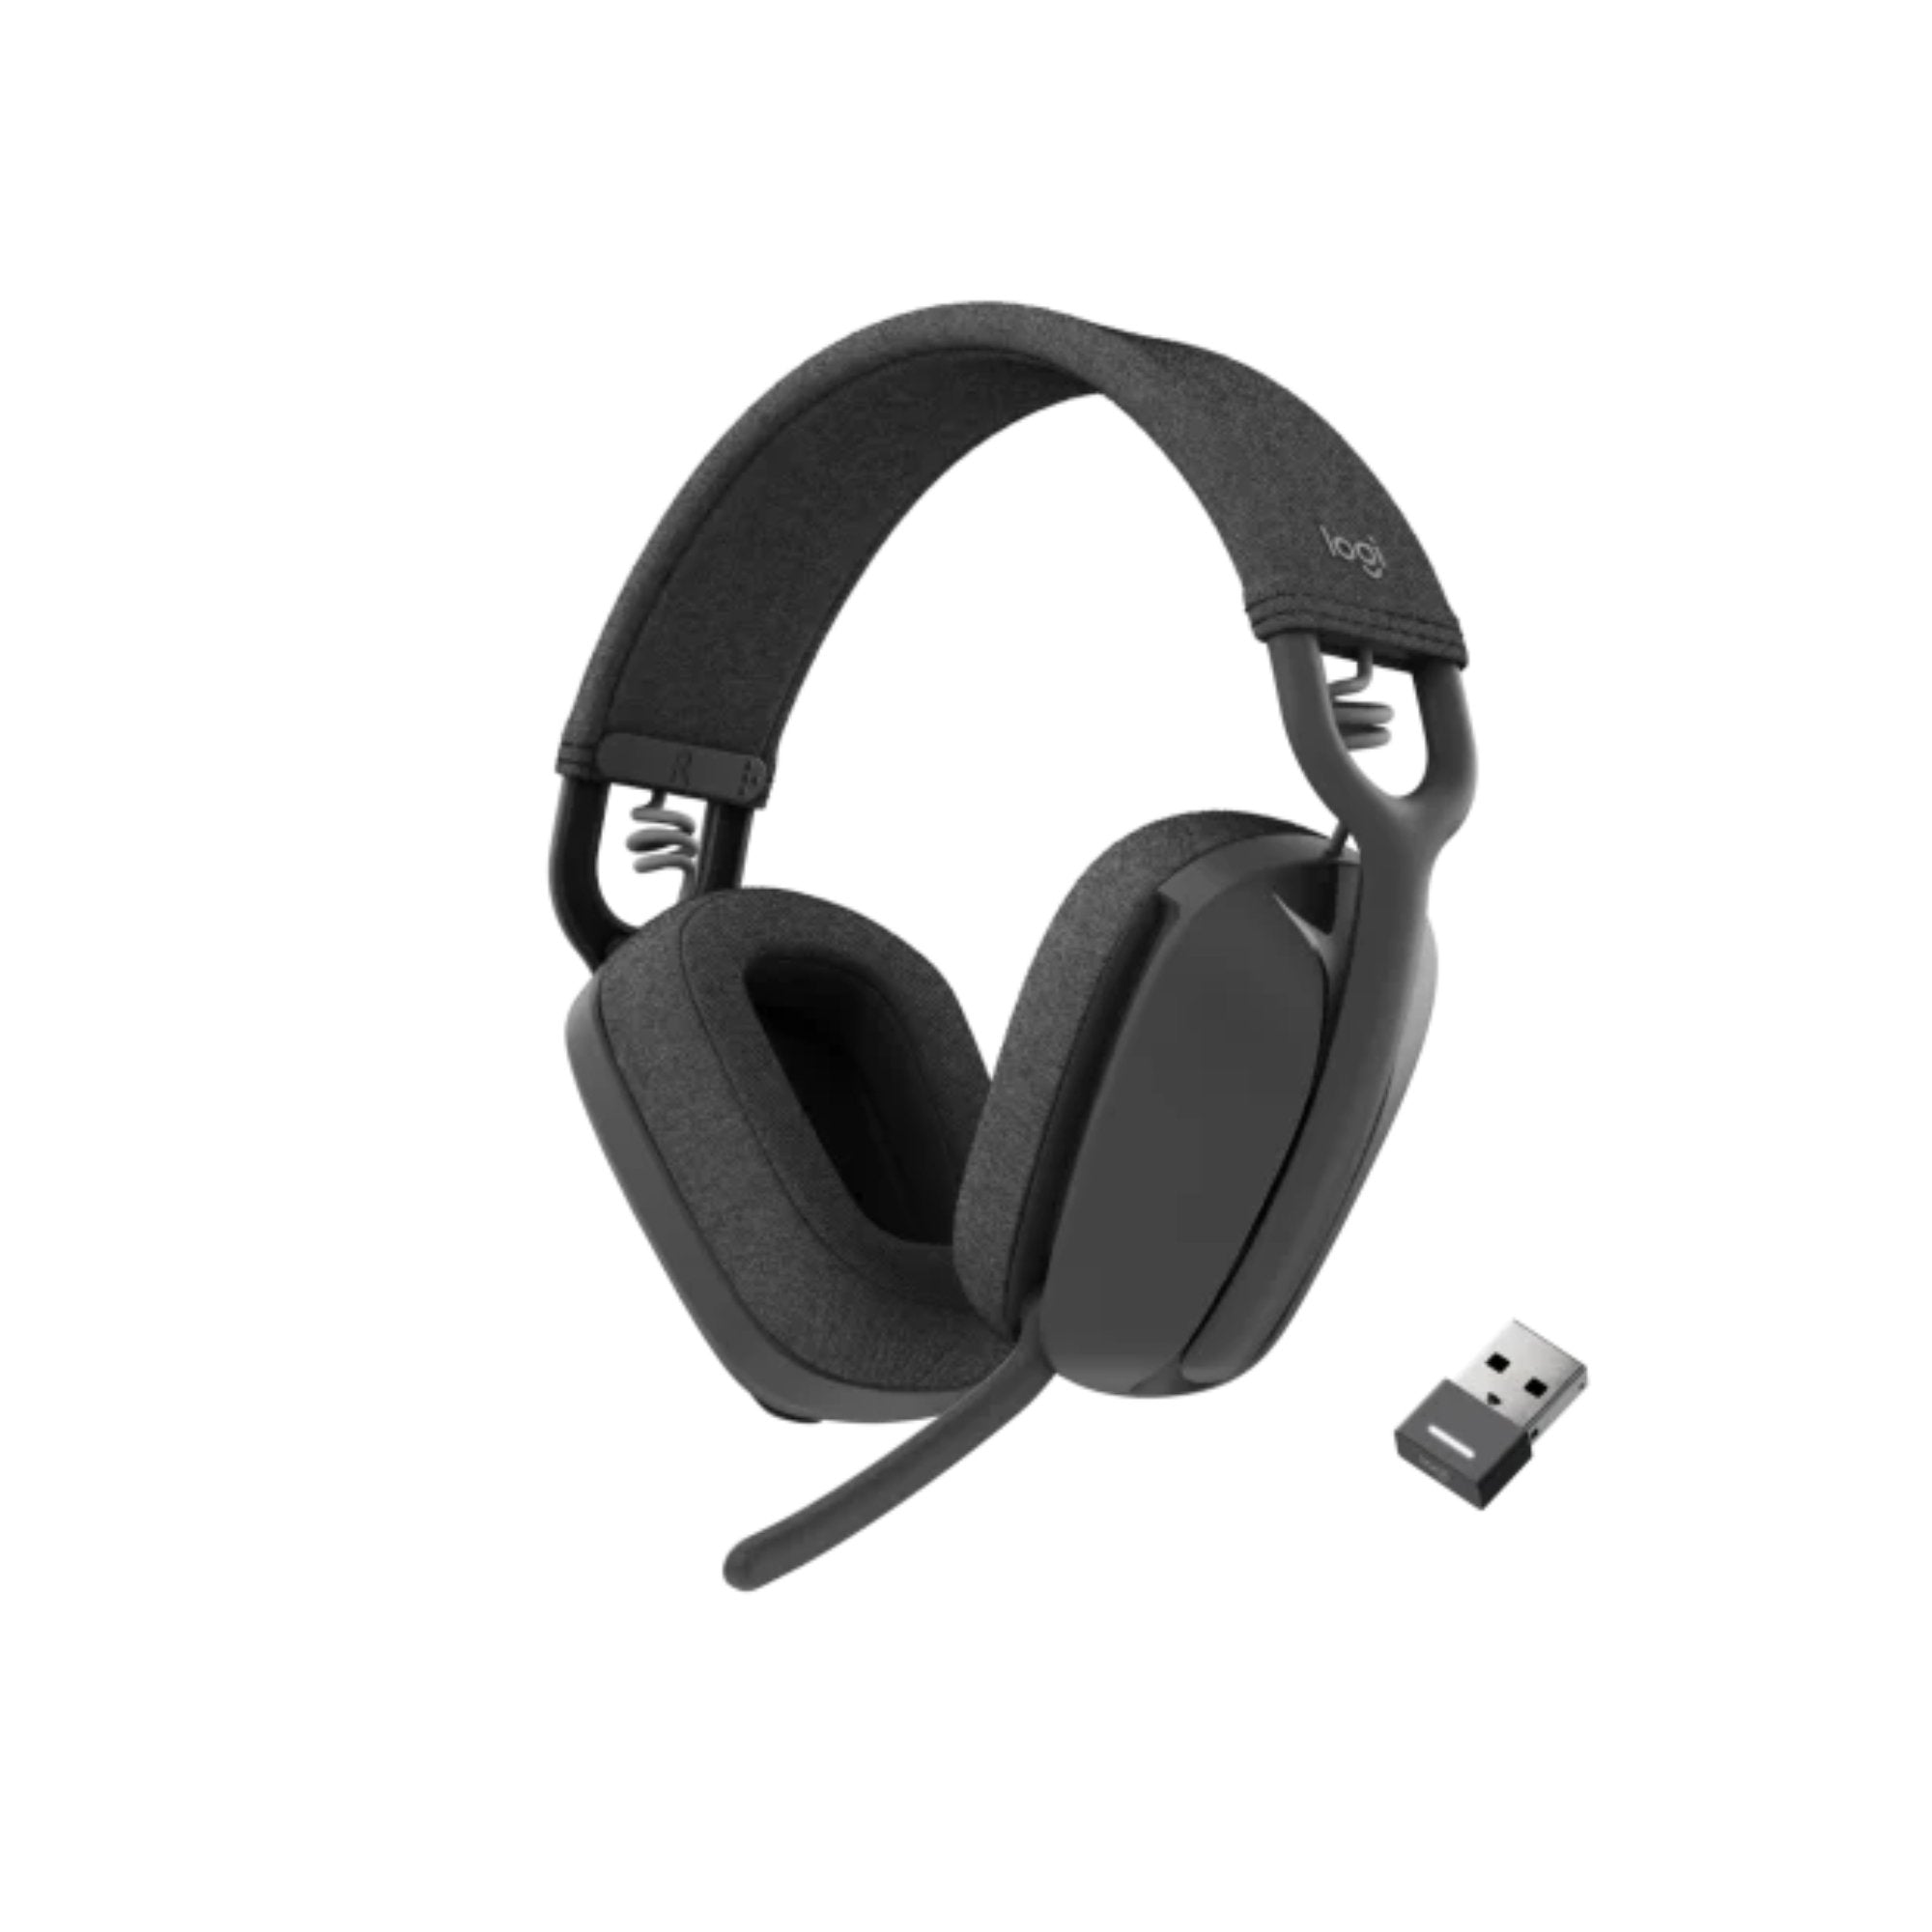 Can I Use My Wireless Headset Without A USB Dongle?